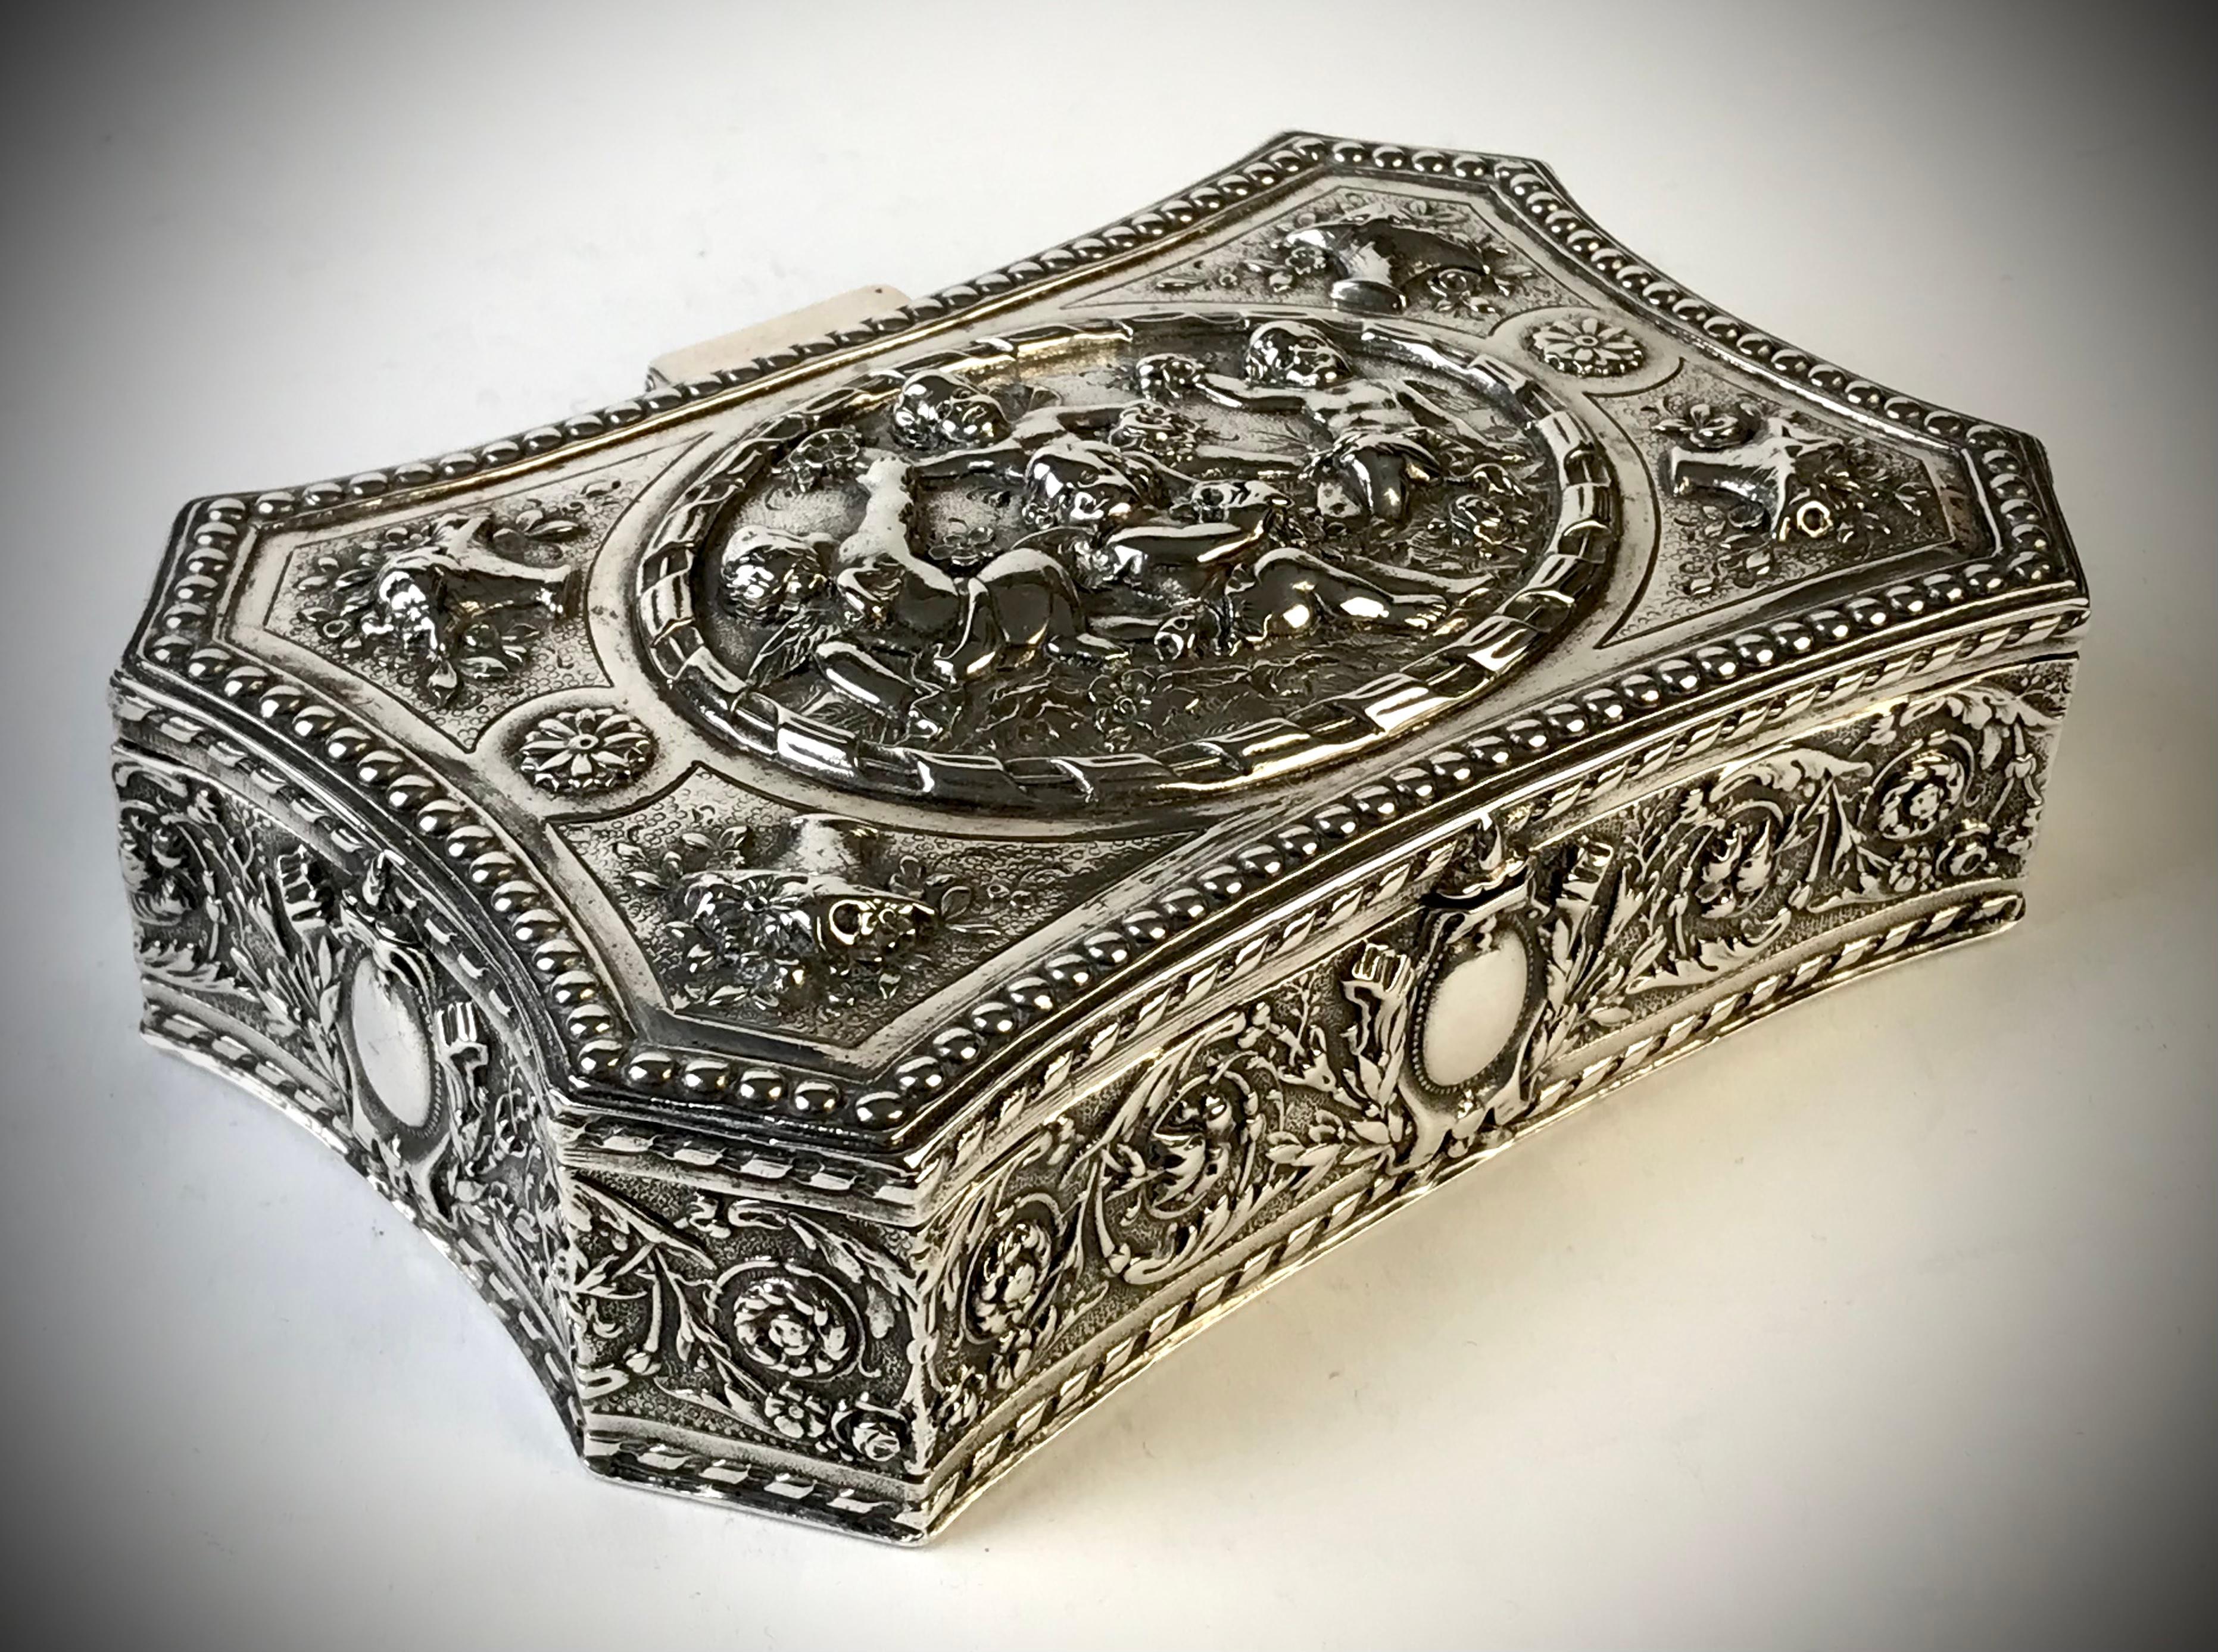 An antique Solid Silver Jewellery box decorated both Putti and baskets of flowers 
Hinged lid with central oval disc with high embossed decoration.

Gold gilded interior 

Hallmarked to the base 800 silver 
Germany circa 1880
Weight 375 grams